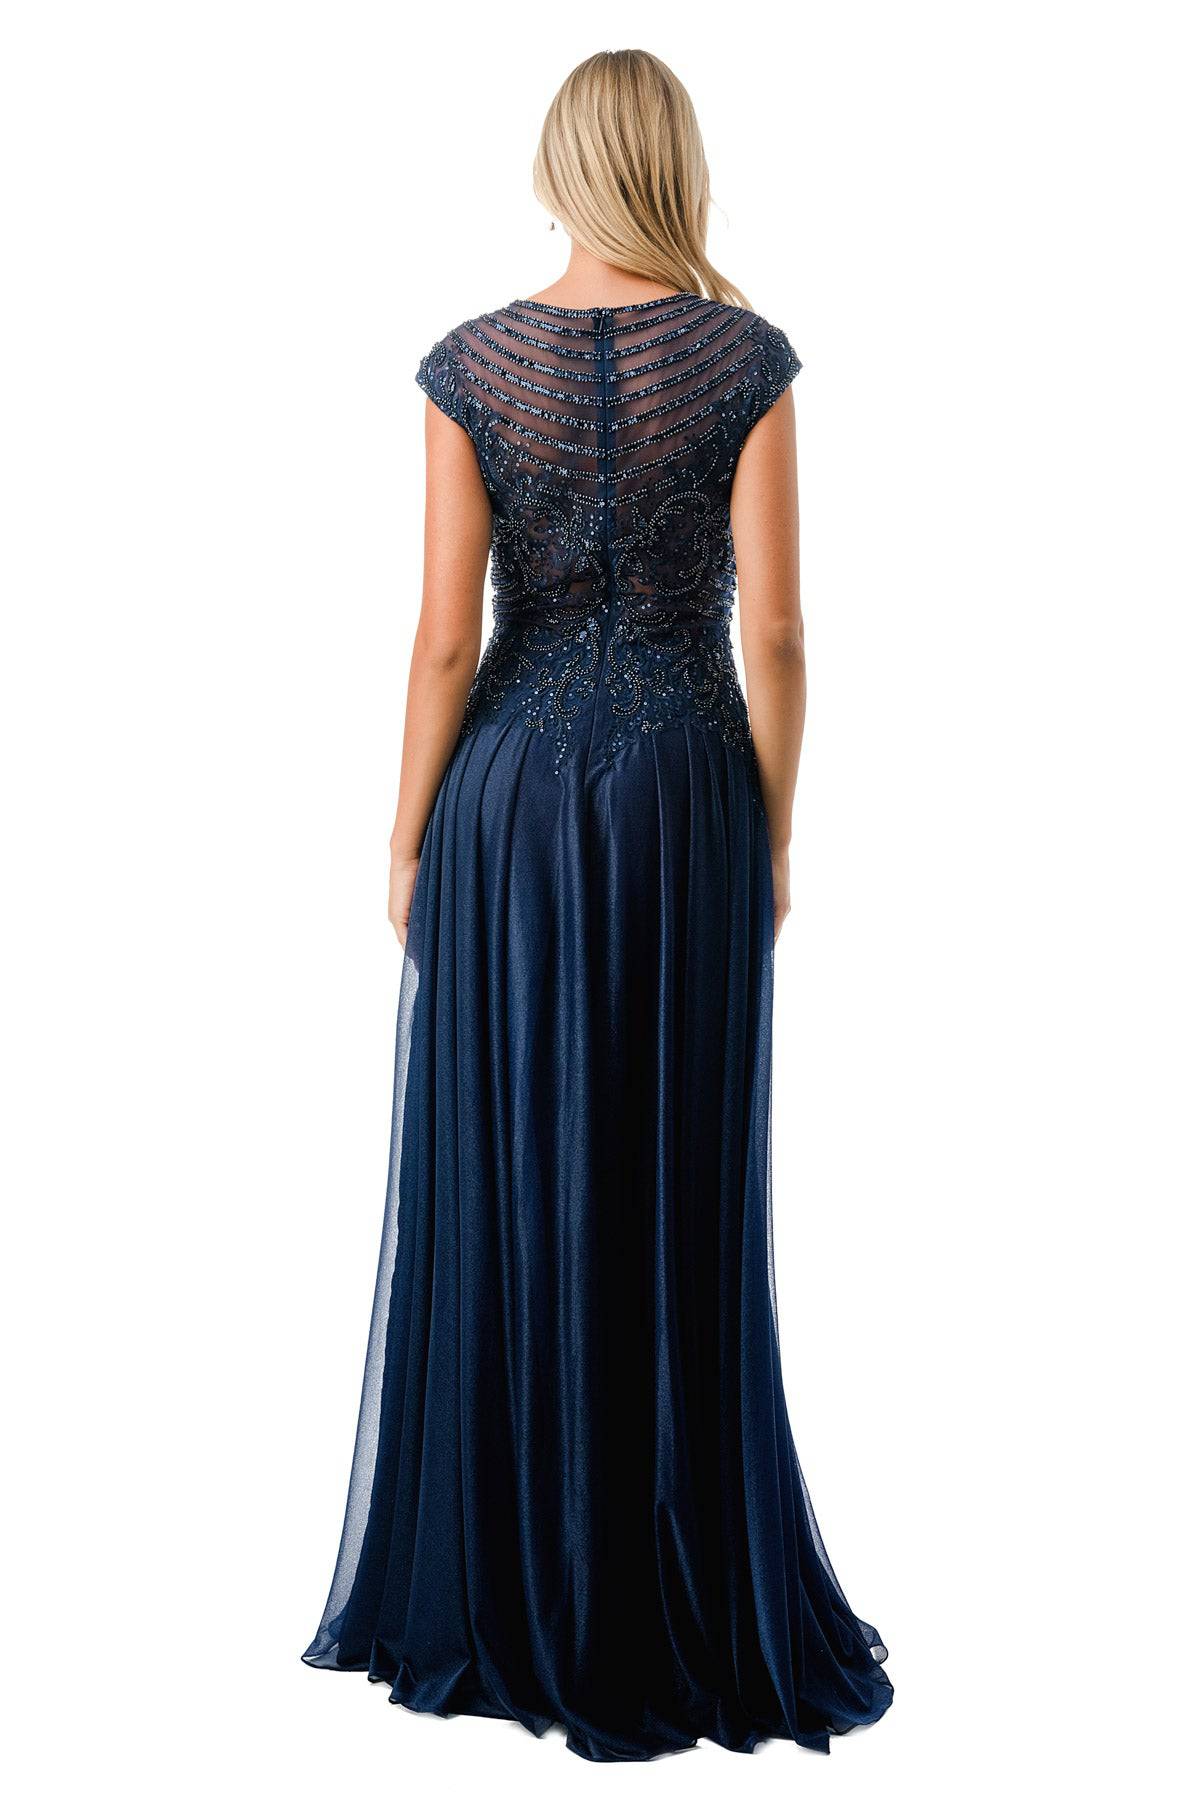 Aspeed M2736Y High Collar Lace Embroidered Chiffon Dress - NORMA REED